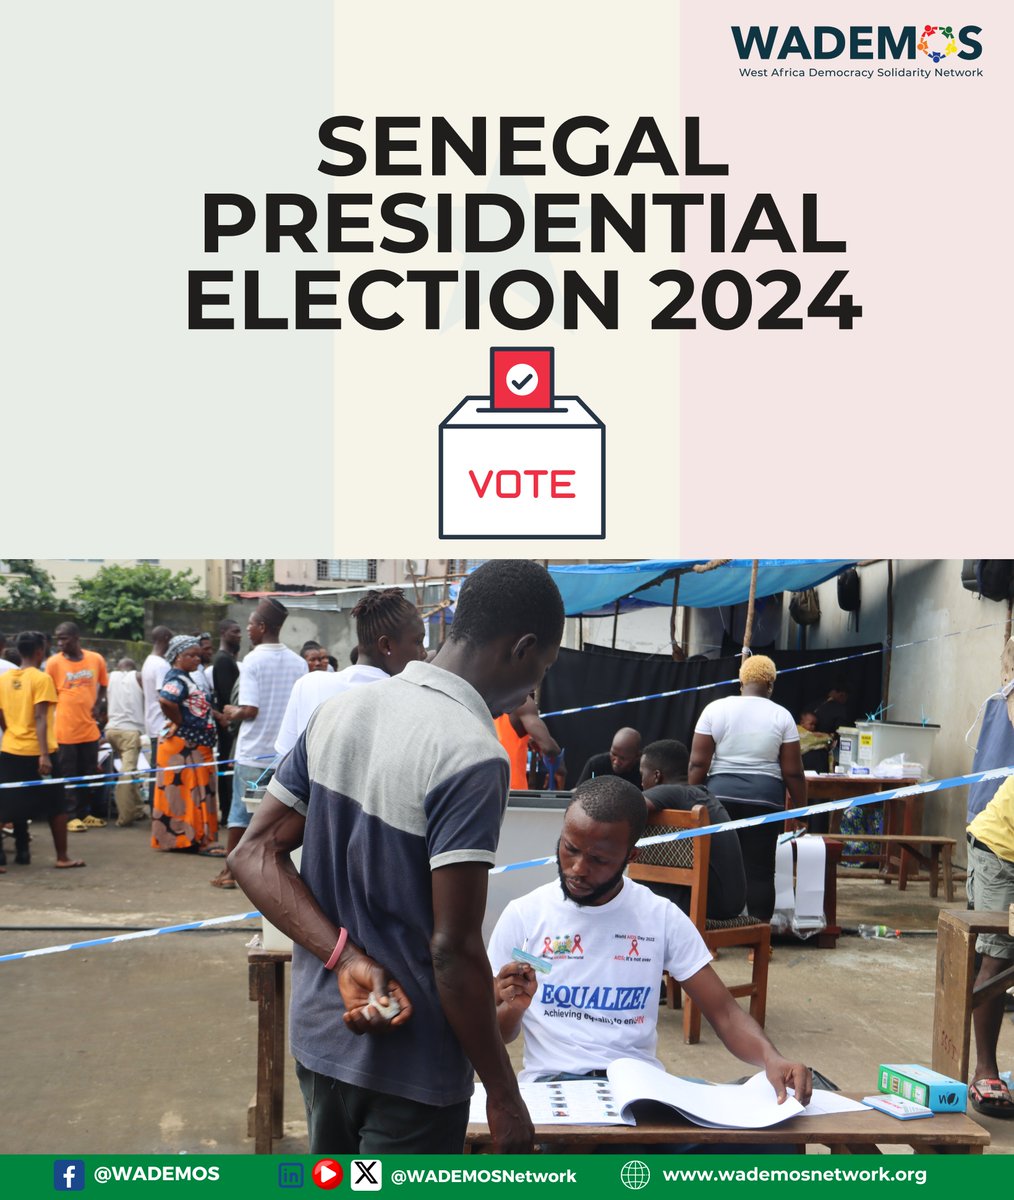 Voting matters as it determines the future of a country. @WADEMOSnetwork entreats all eligible voters in Senegal to exercise their civic mandate responsibly as the country elects a new President. We wish you an incident-free poll today. #SenegalVote #SunuElection2024